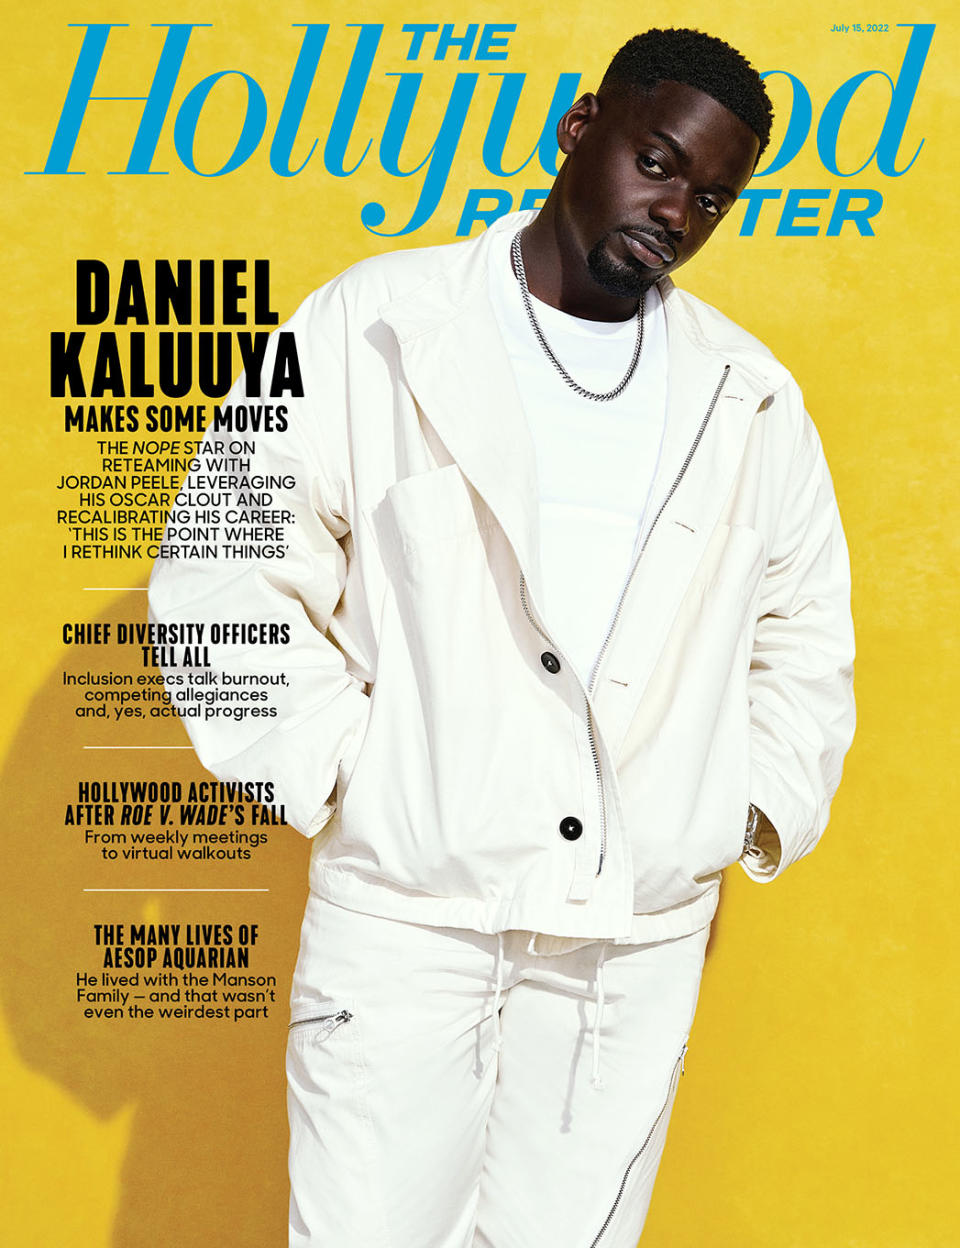 Daniel Kaluuya on the July 15, 2022 cover of The Hollywood Reporter - Credit: Photographed by Obidi Nzeribe